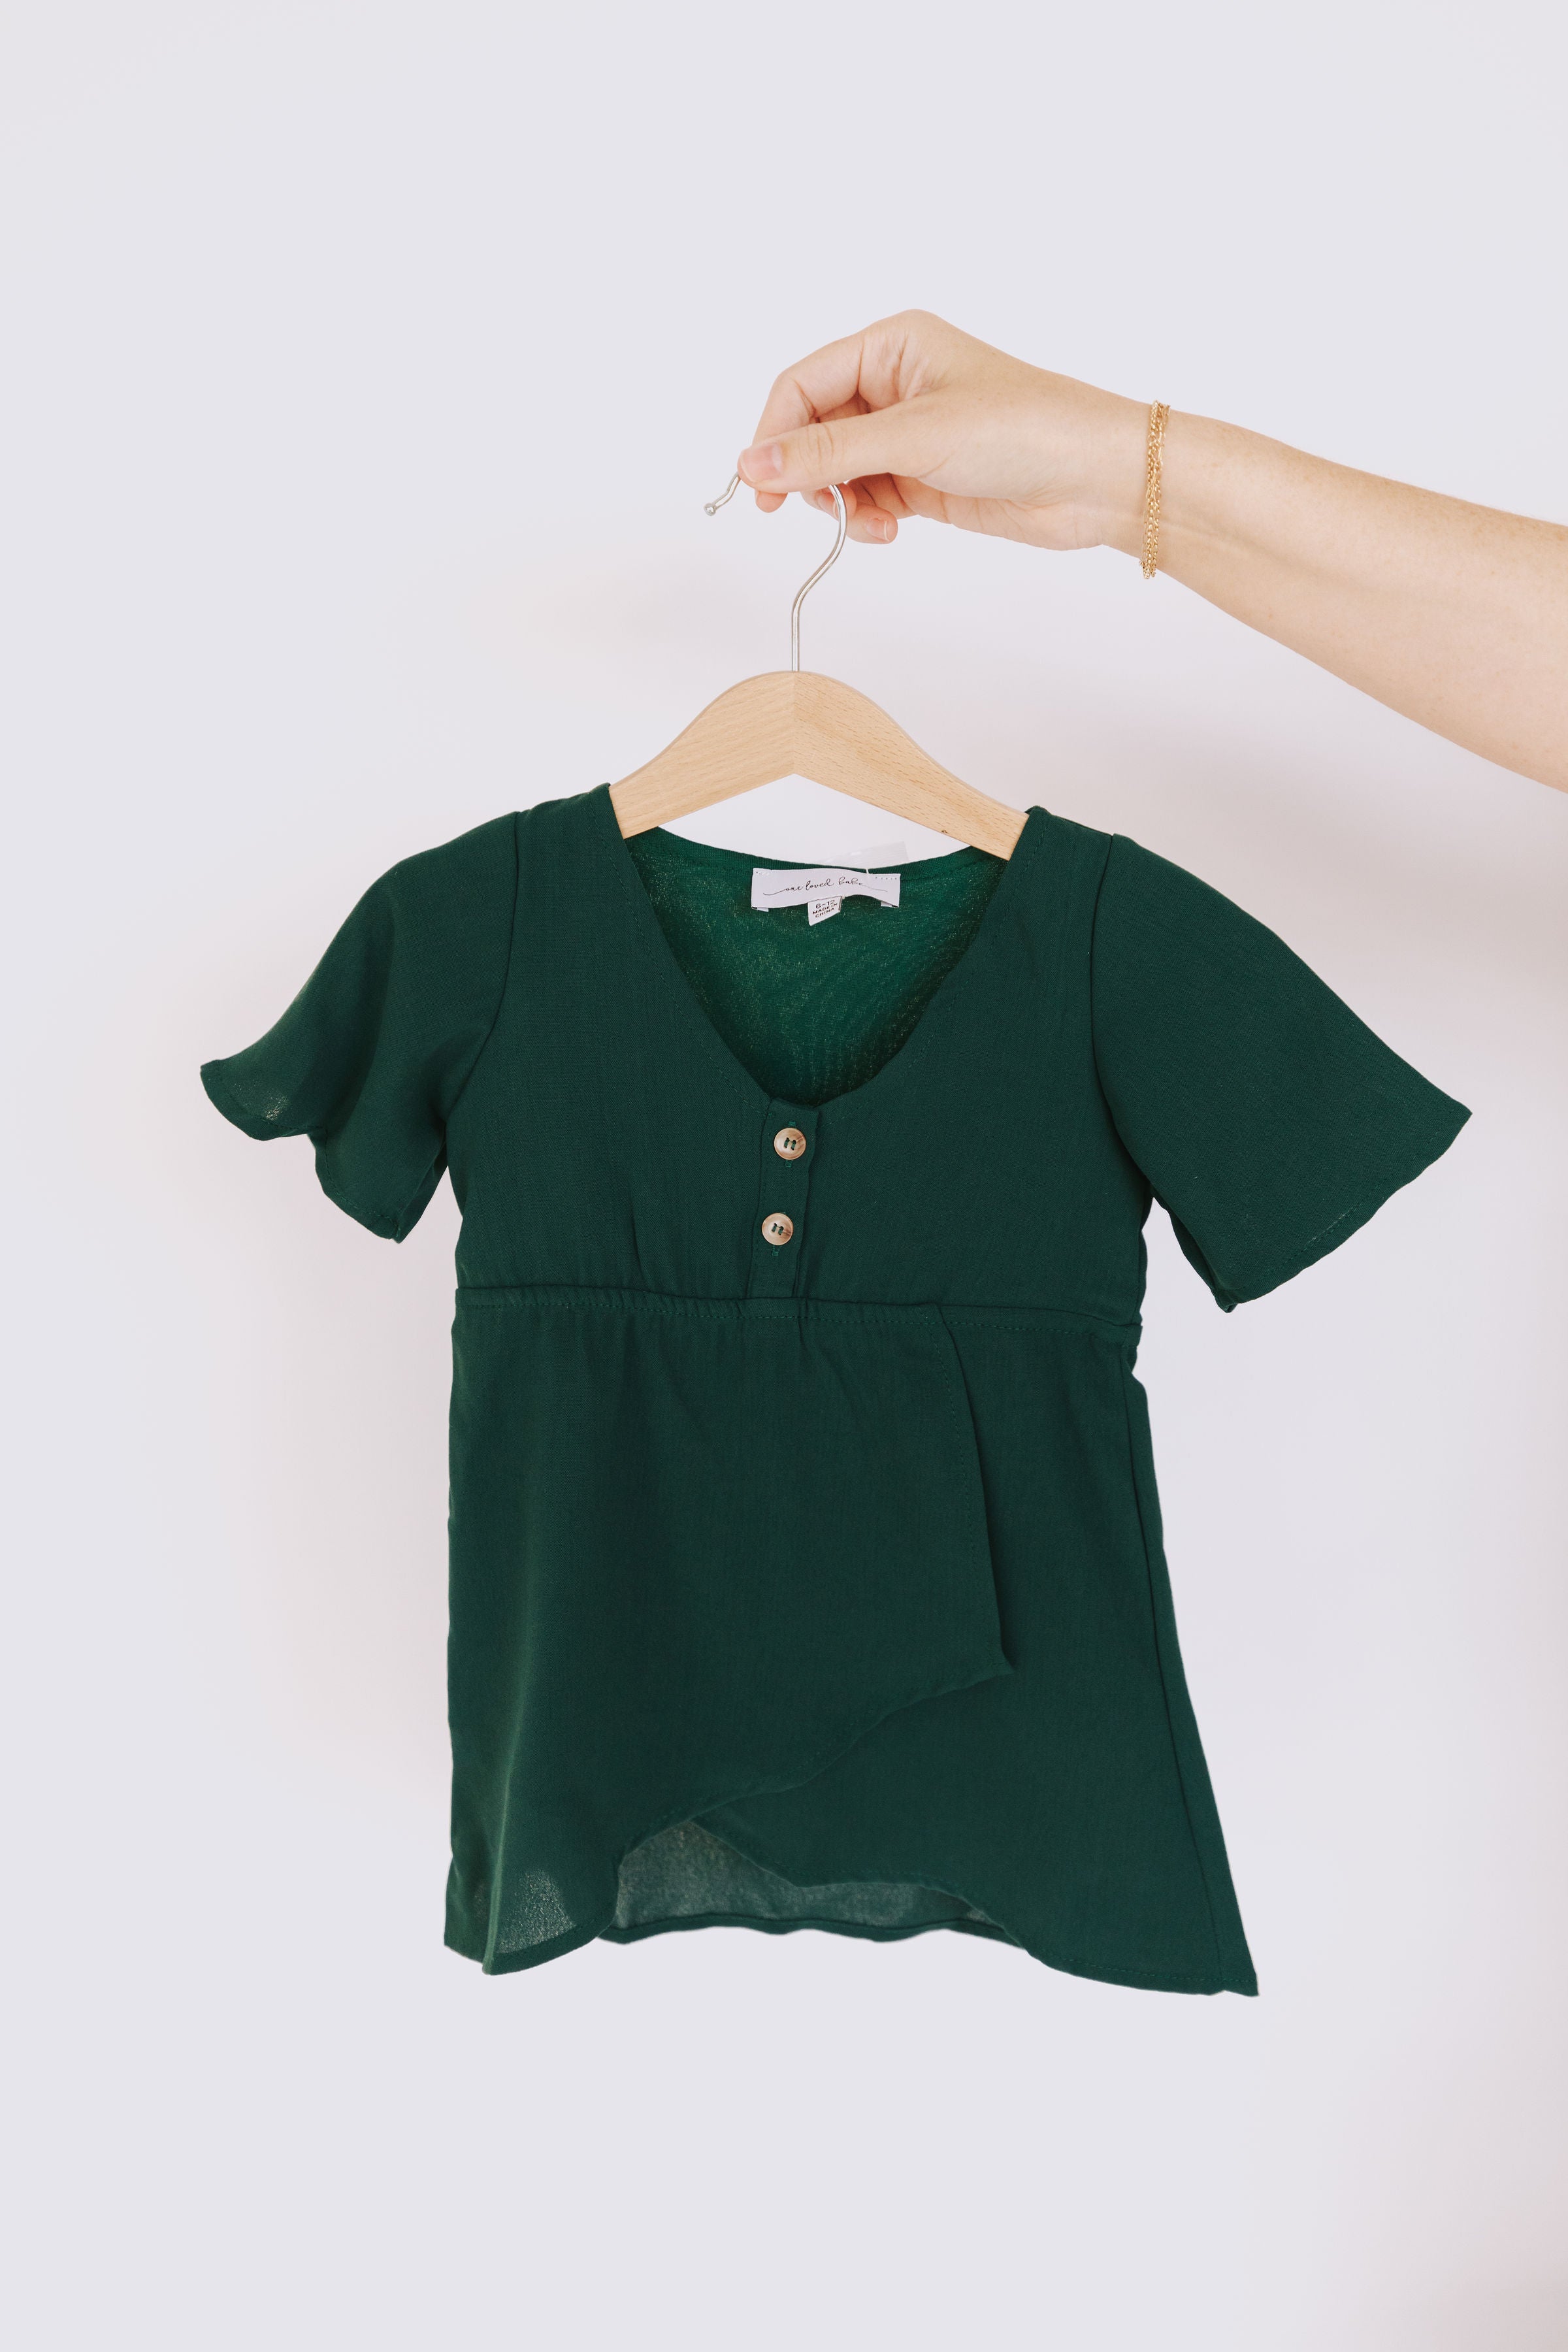 ONE LOVED BABE - Mini Windsor Dress - 5 Colors